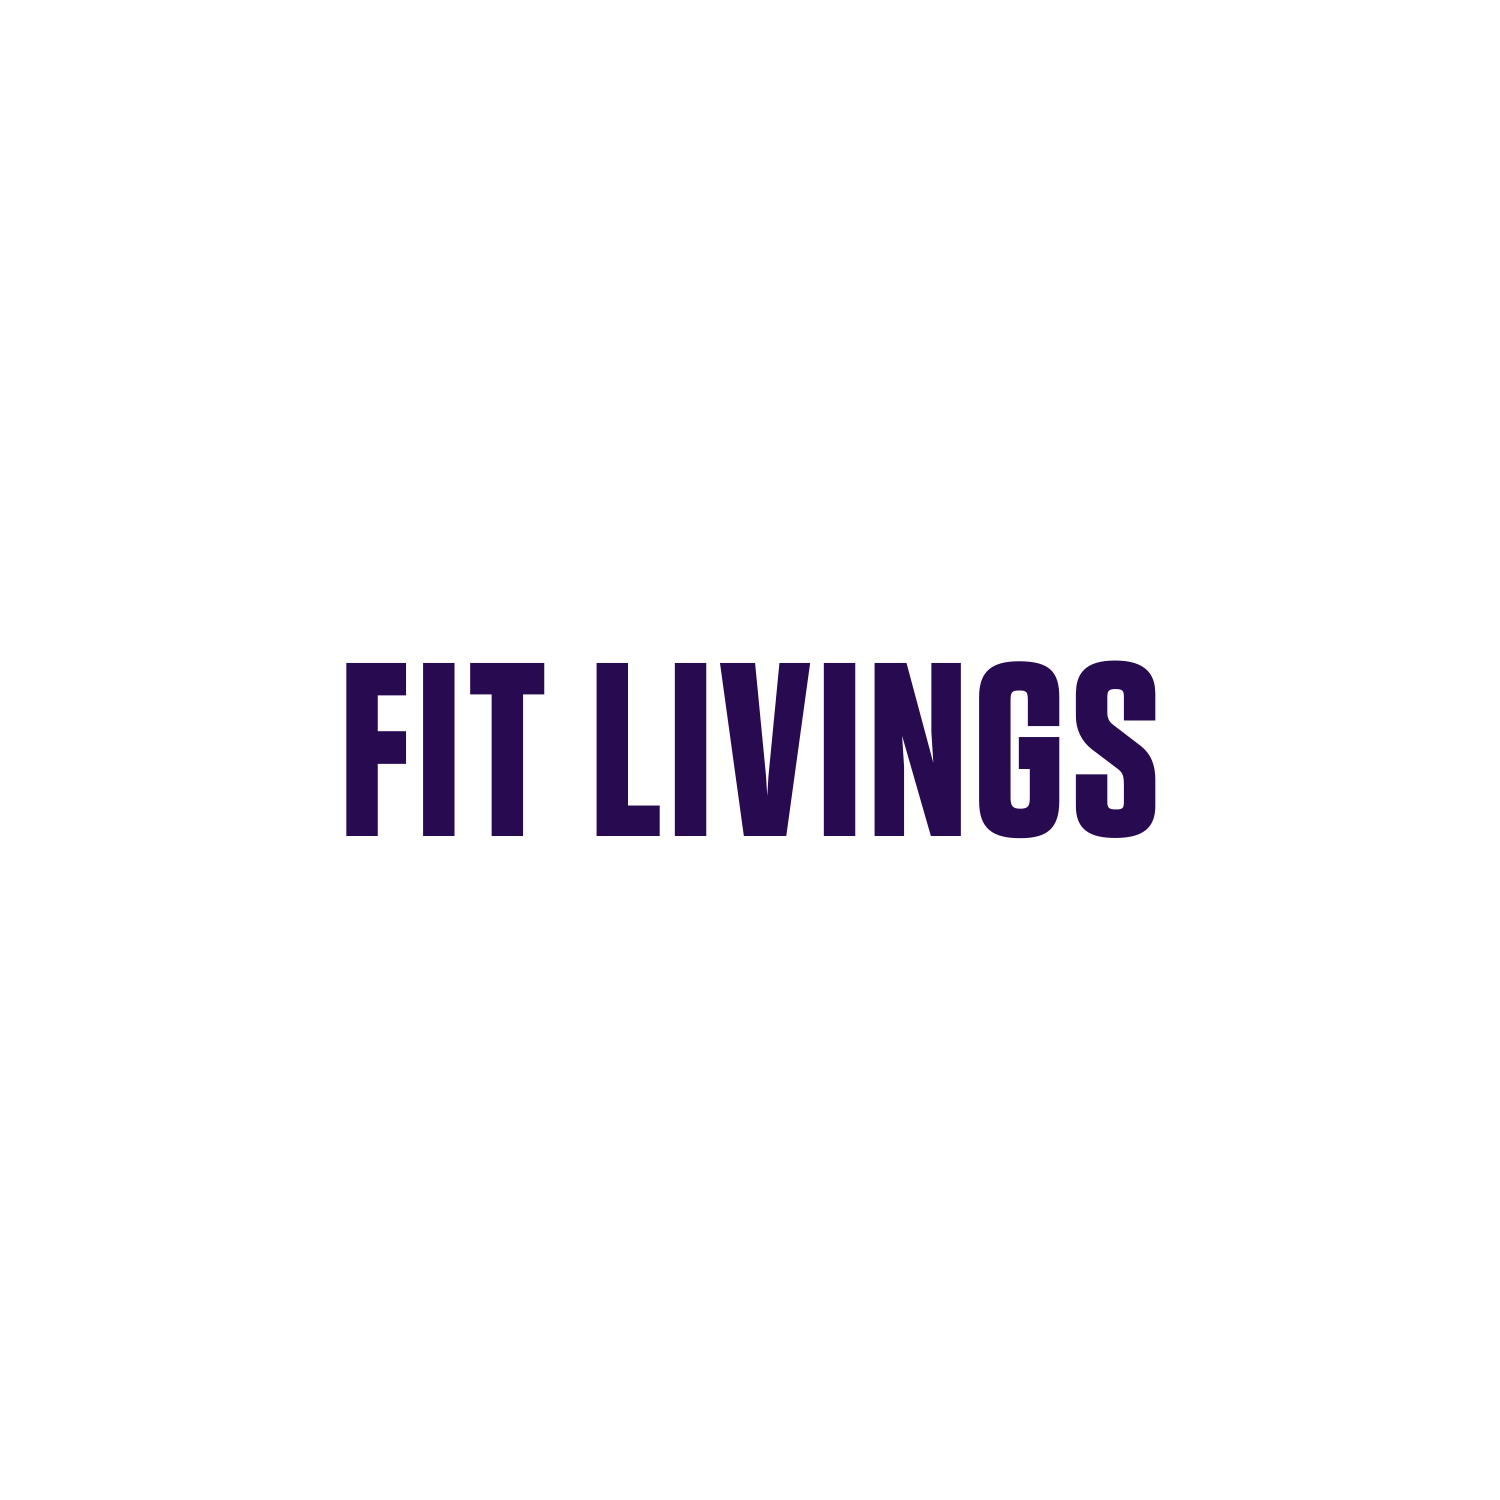 Fitliving (1).png